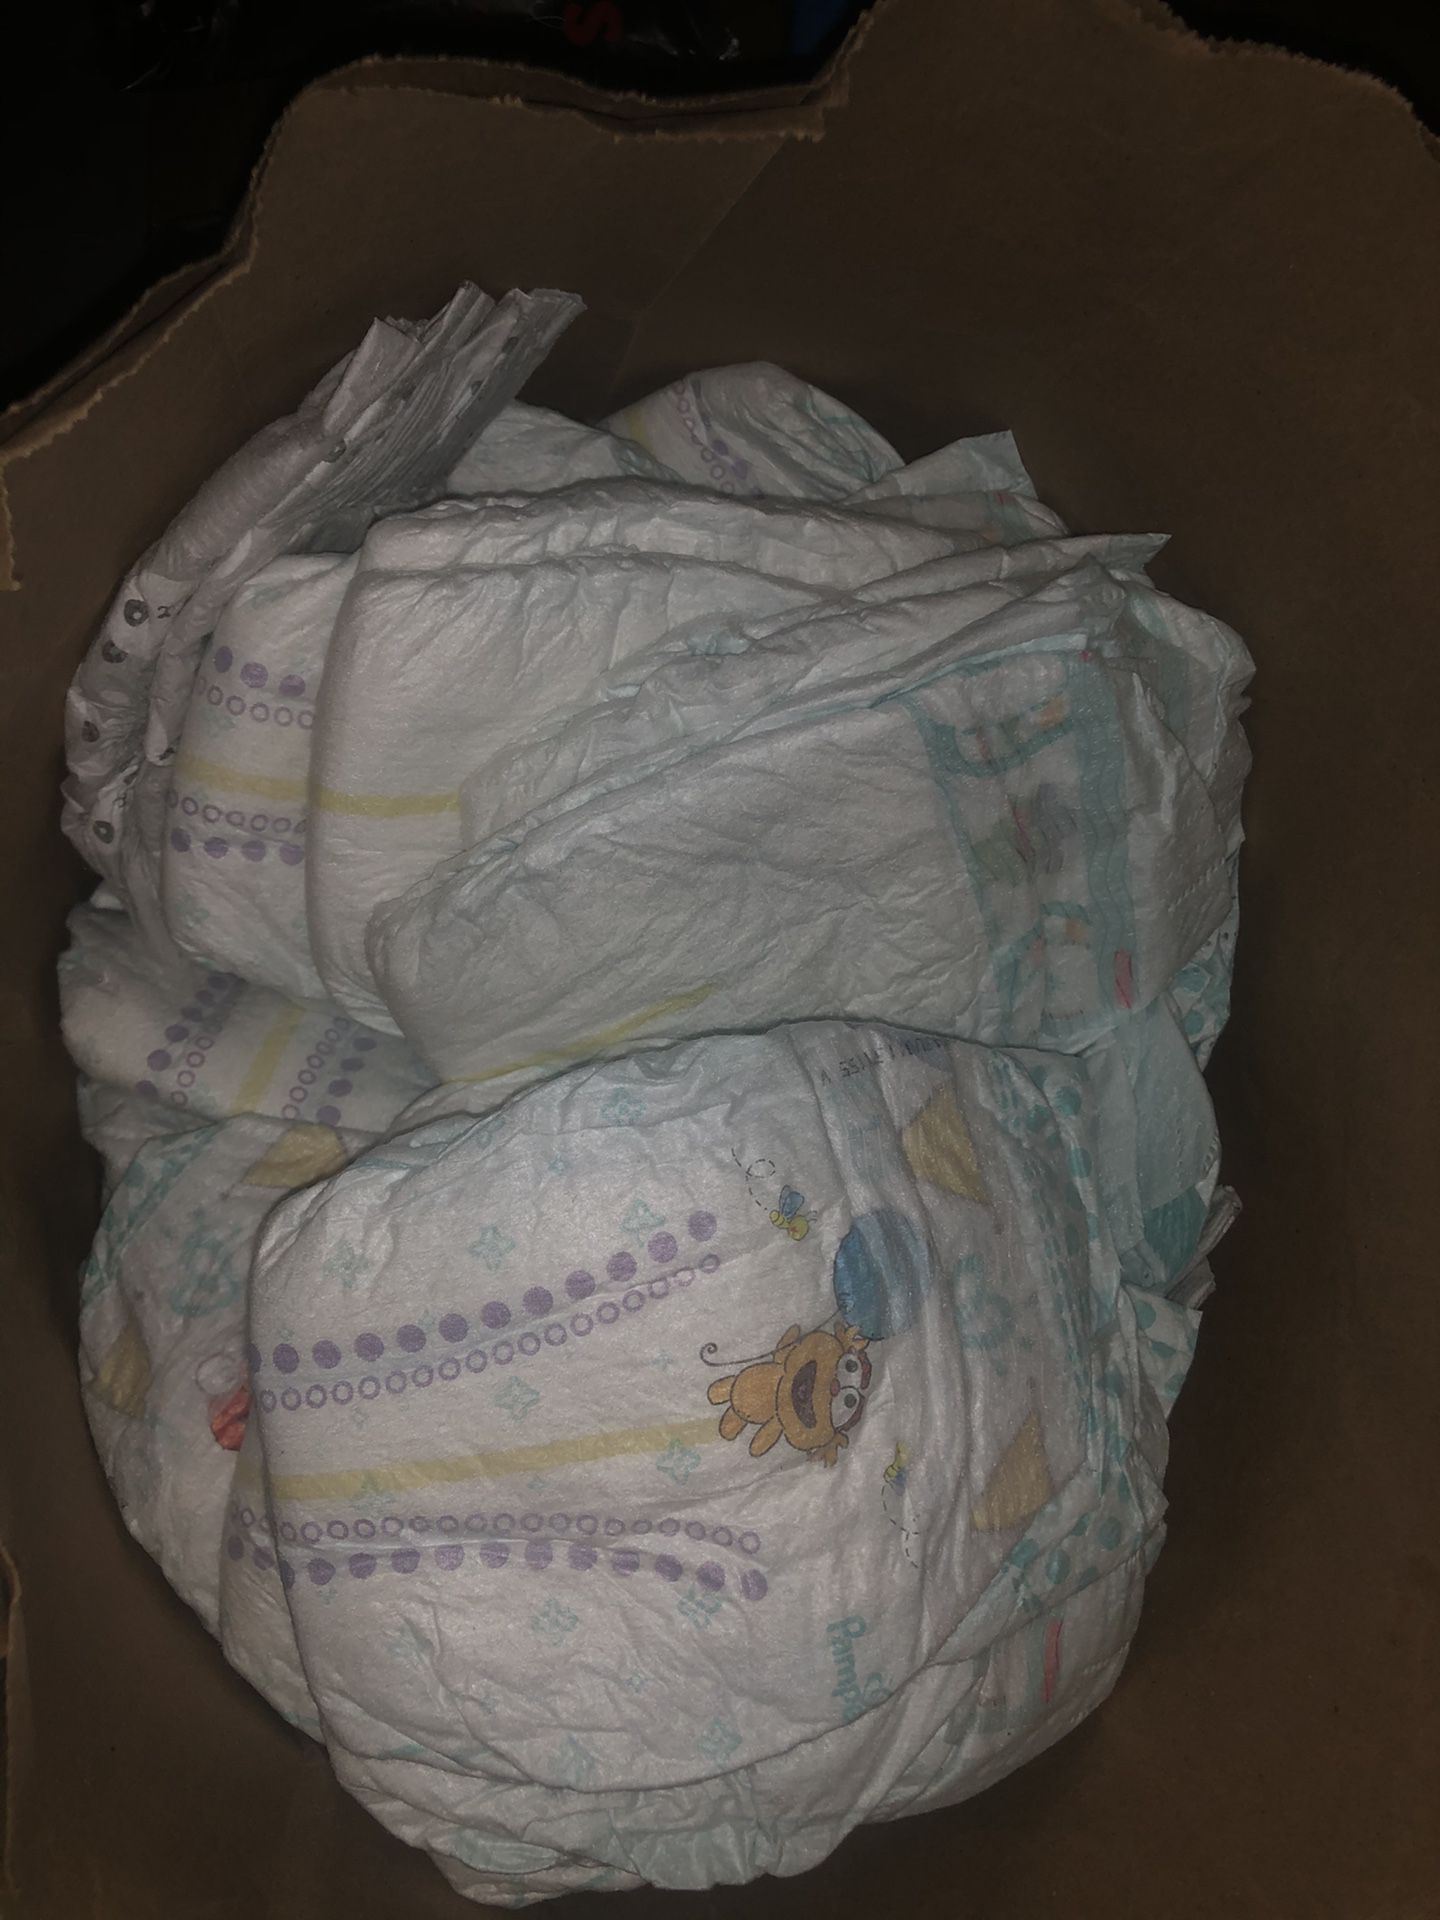 Pampers mainly size 1 & NB Diapers.